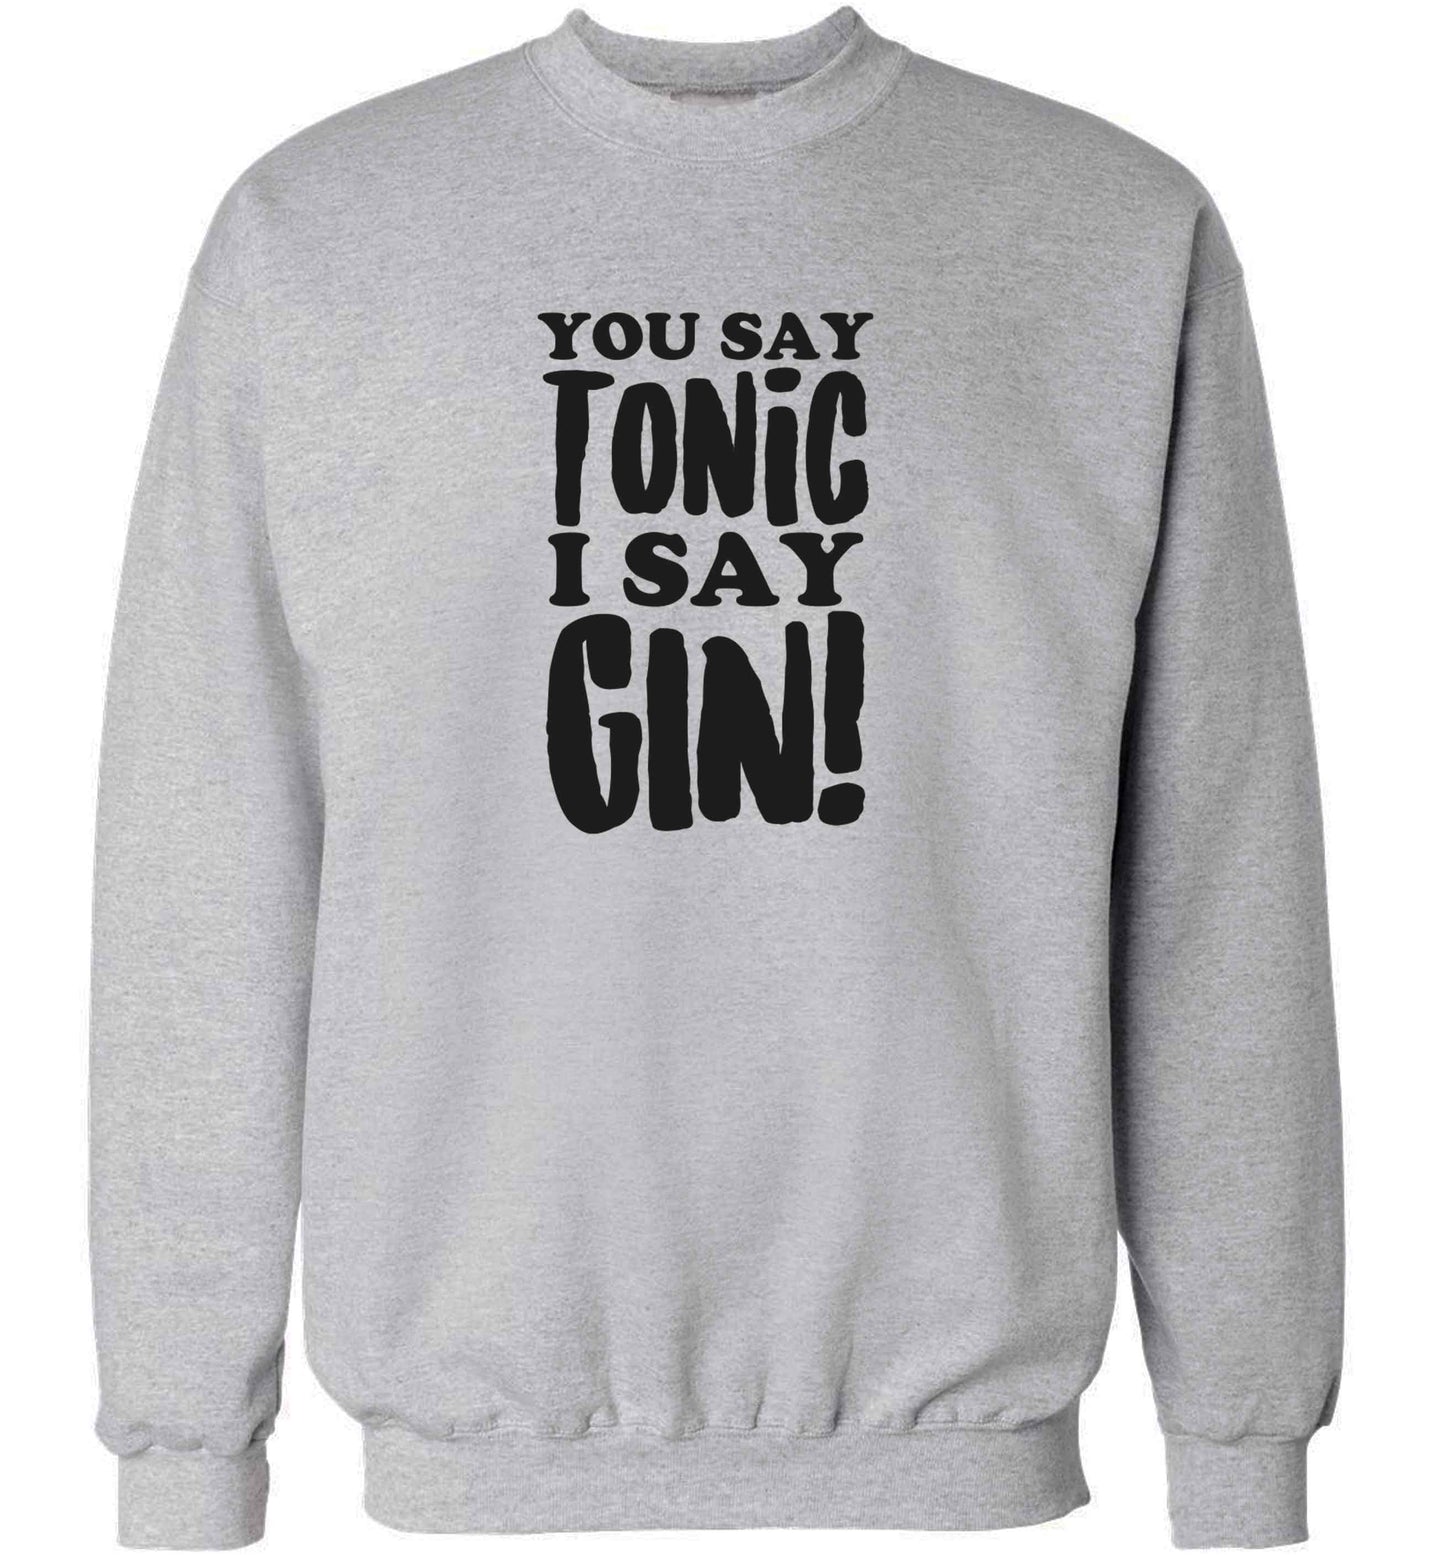 You say tonic I say gin adult's unisex grey sweater 2XL